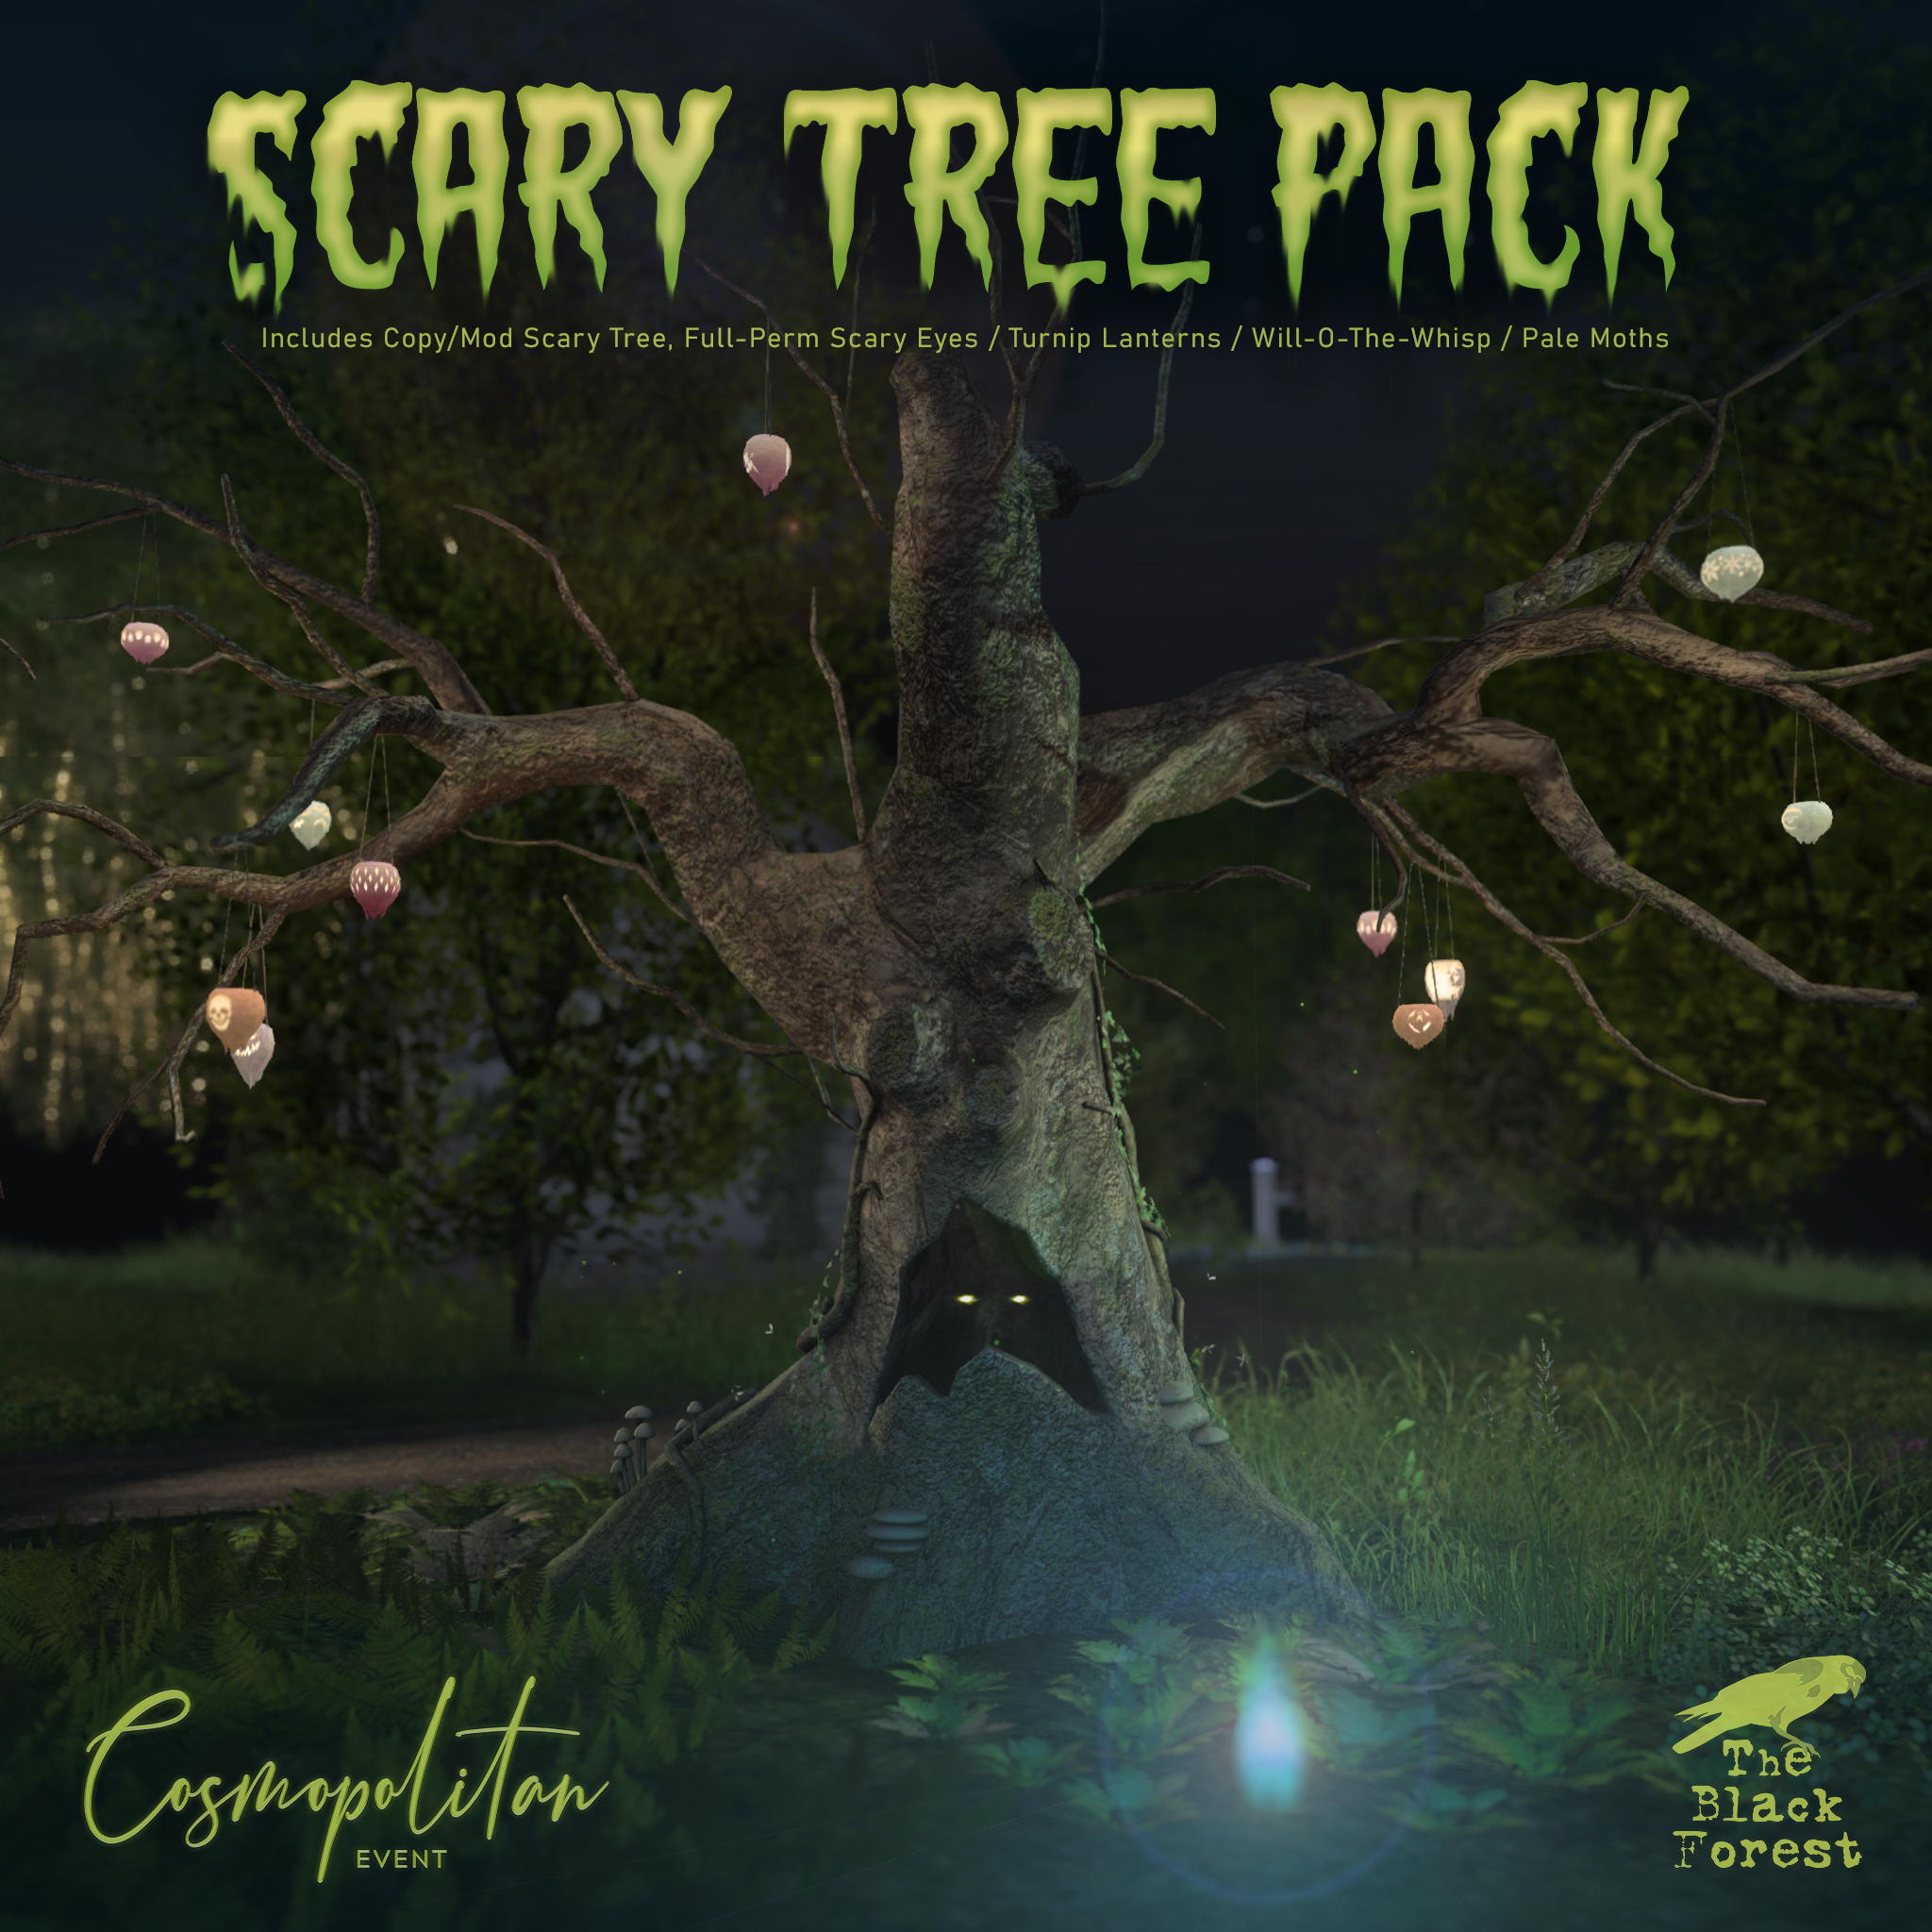 The Black Forest – Scary Tree Pack